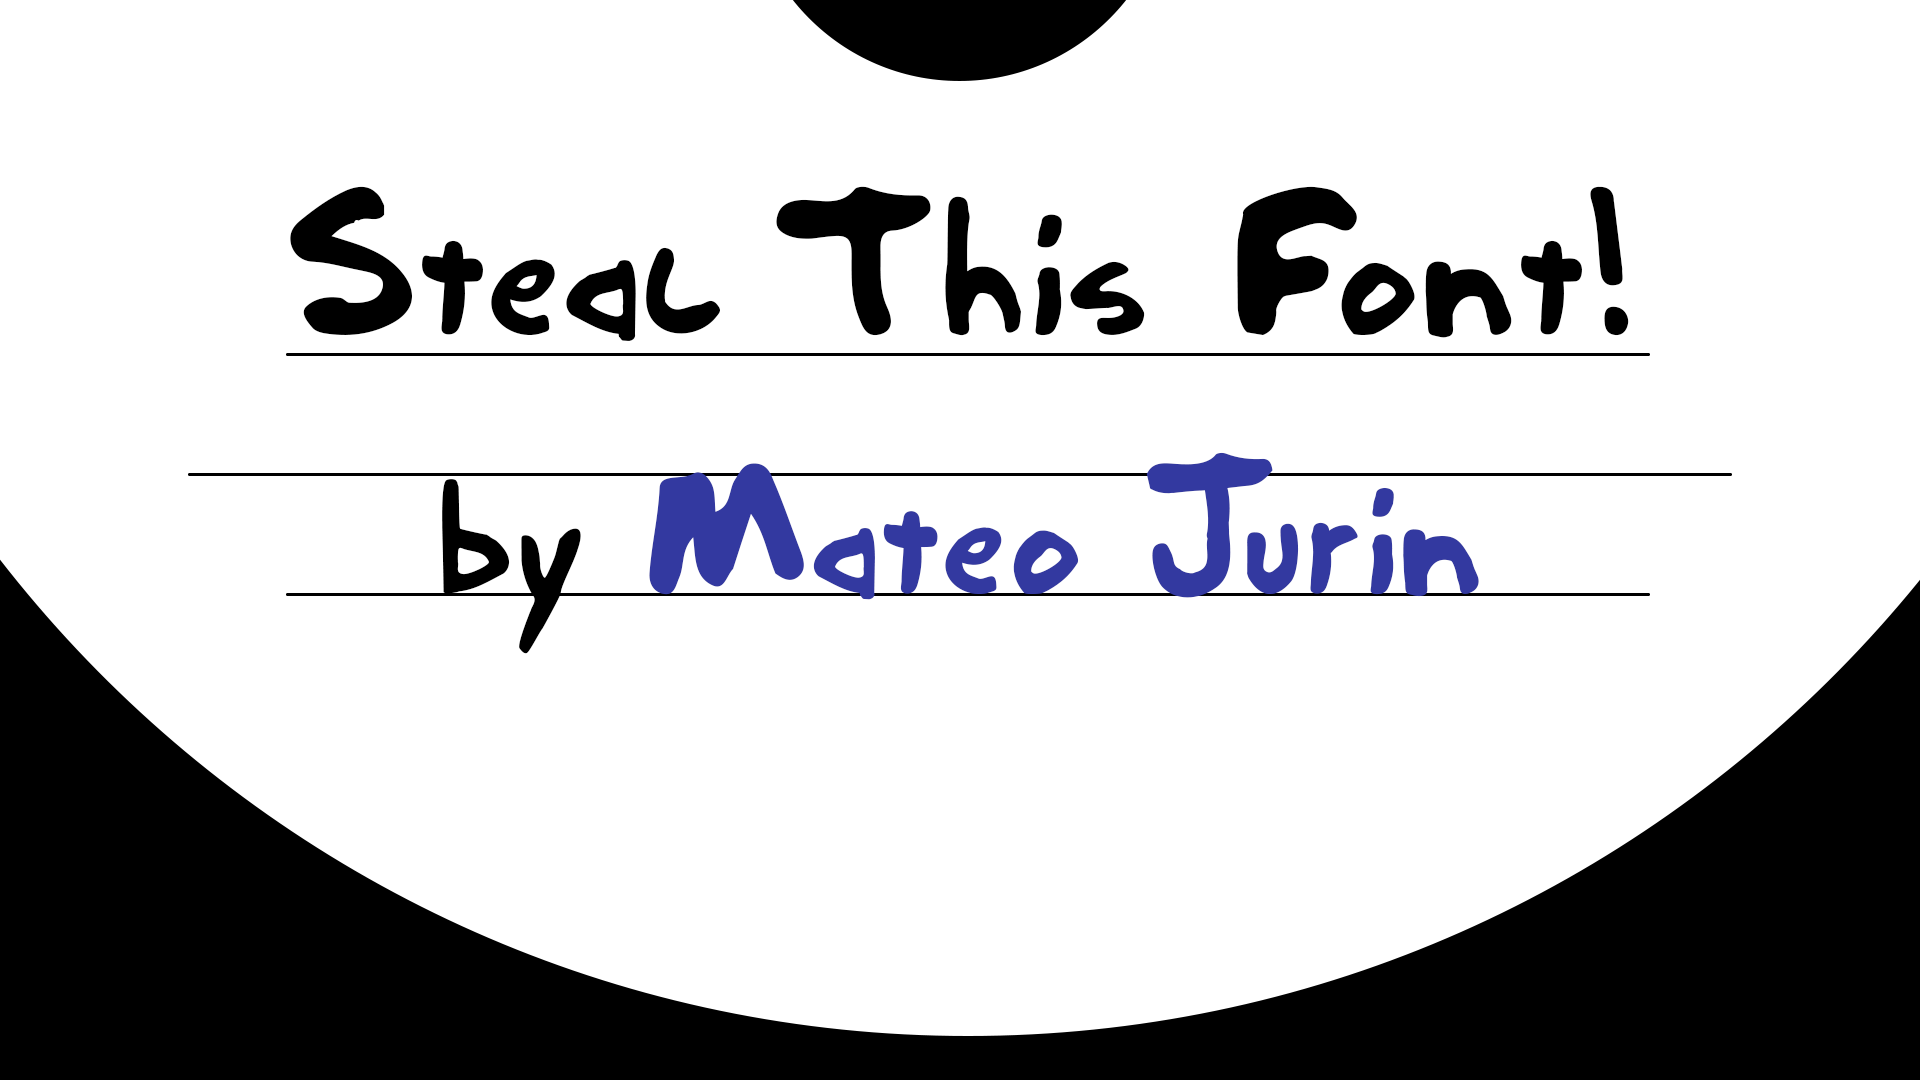 Steal This Font!